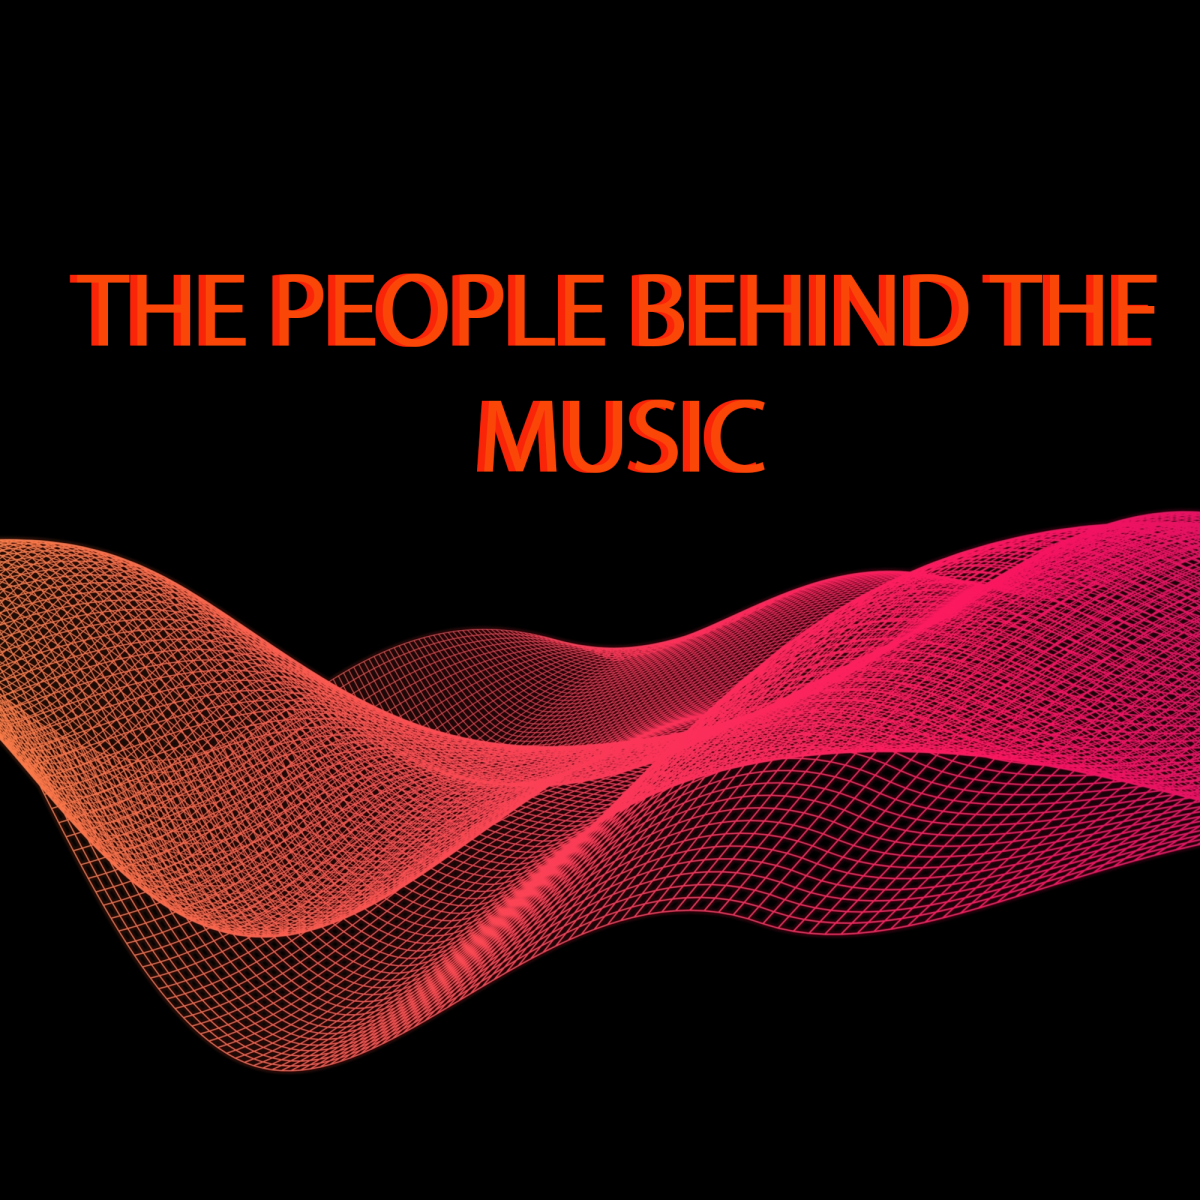 The People Behind the Music